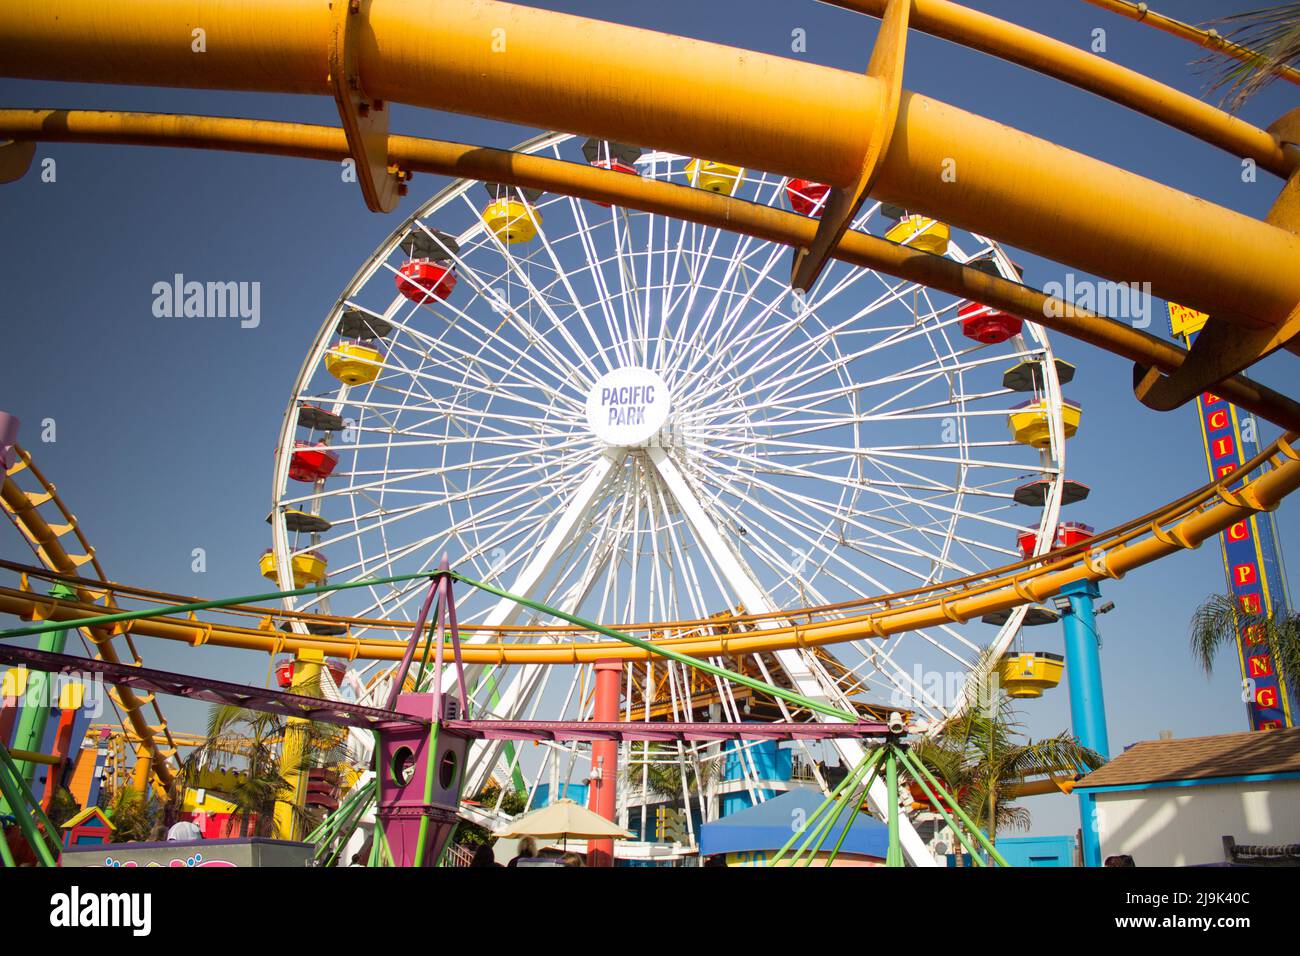 Pacific Park's Ferris Wheel Named One Of 'The Romantic Places for